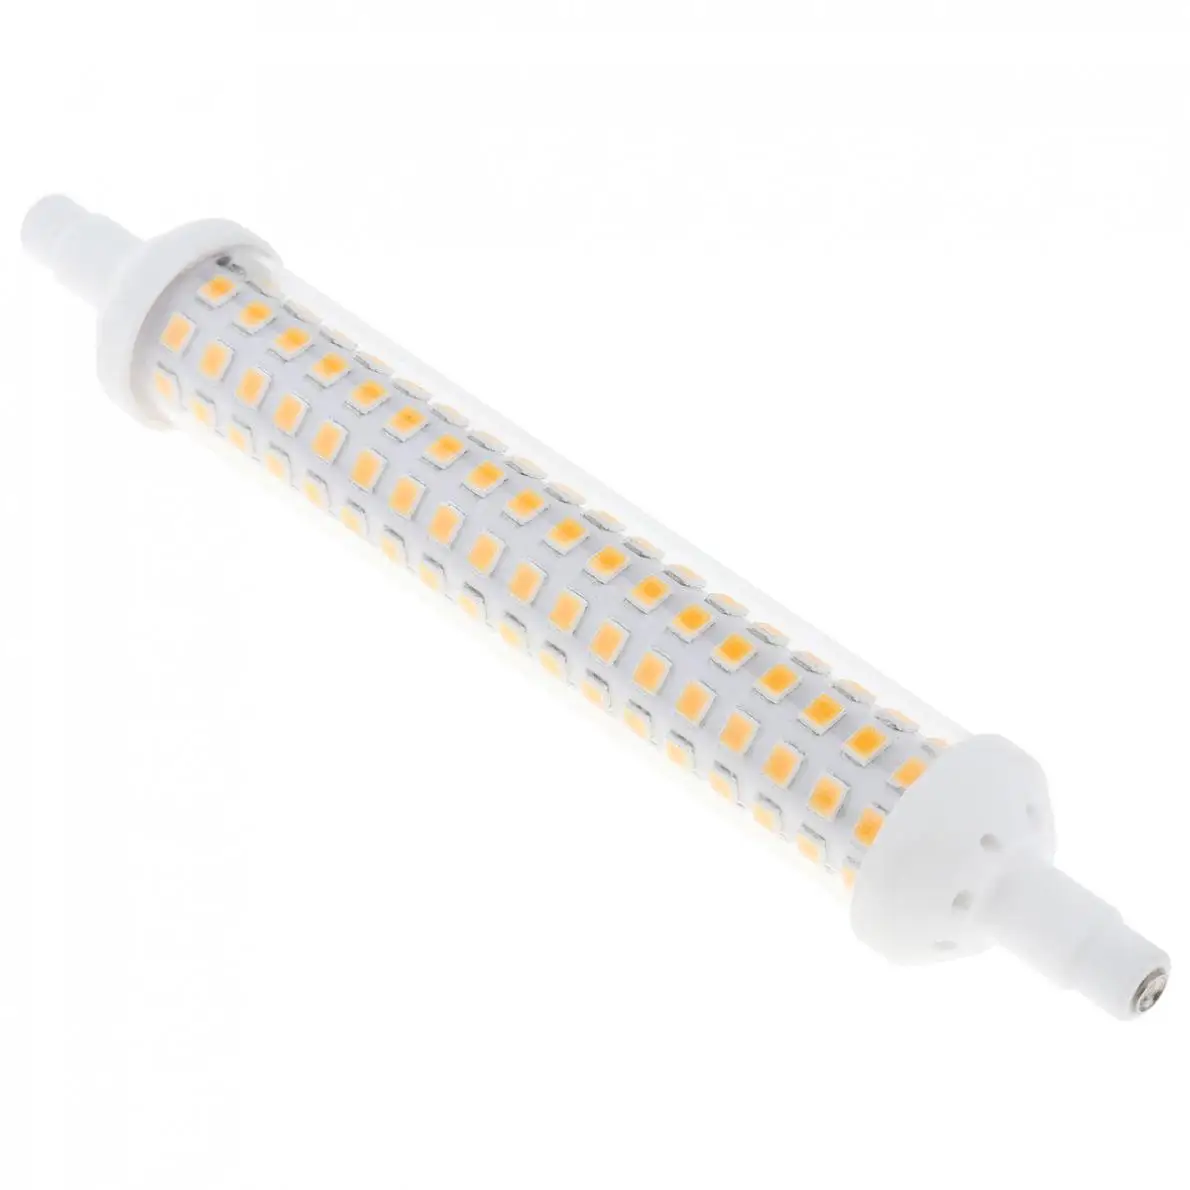 

12W 1000LM 144 LEDs 135mm AC 220 - 240V R7S SMD 2835 Mini 360 Degrees Dimmable Warm White / Cool White with Horizontal